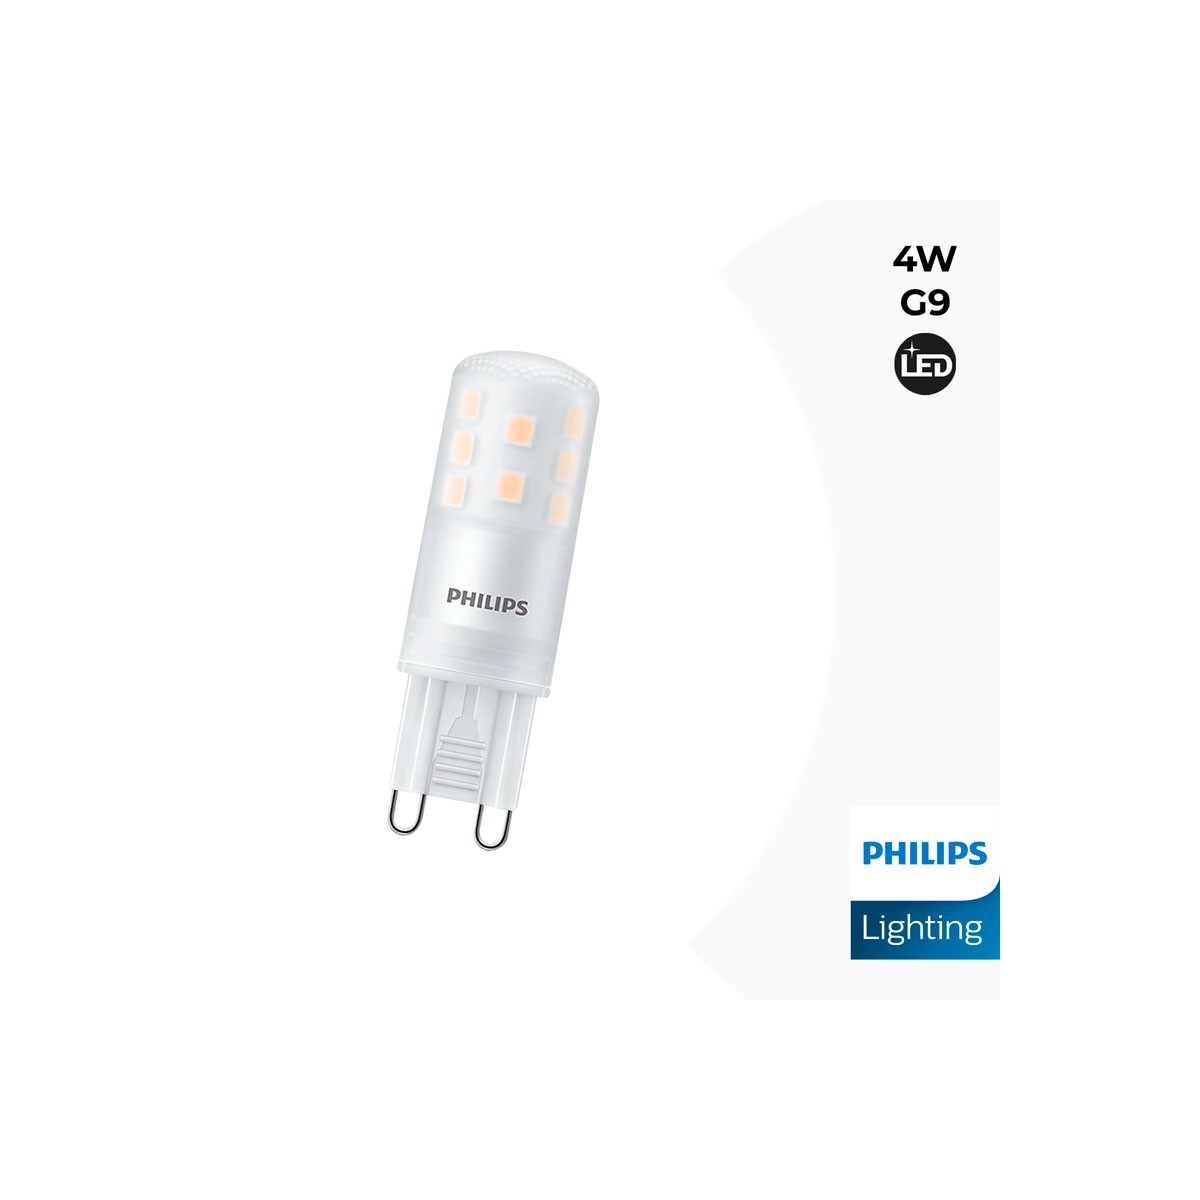 Dimmable G9 bulb 4W 480 lumens